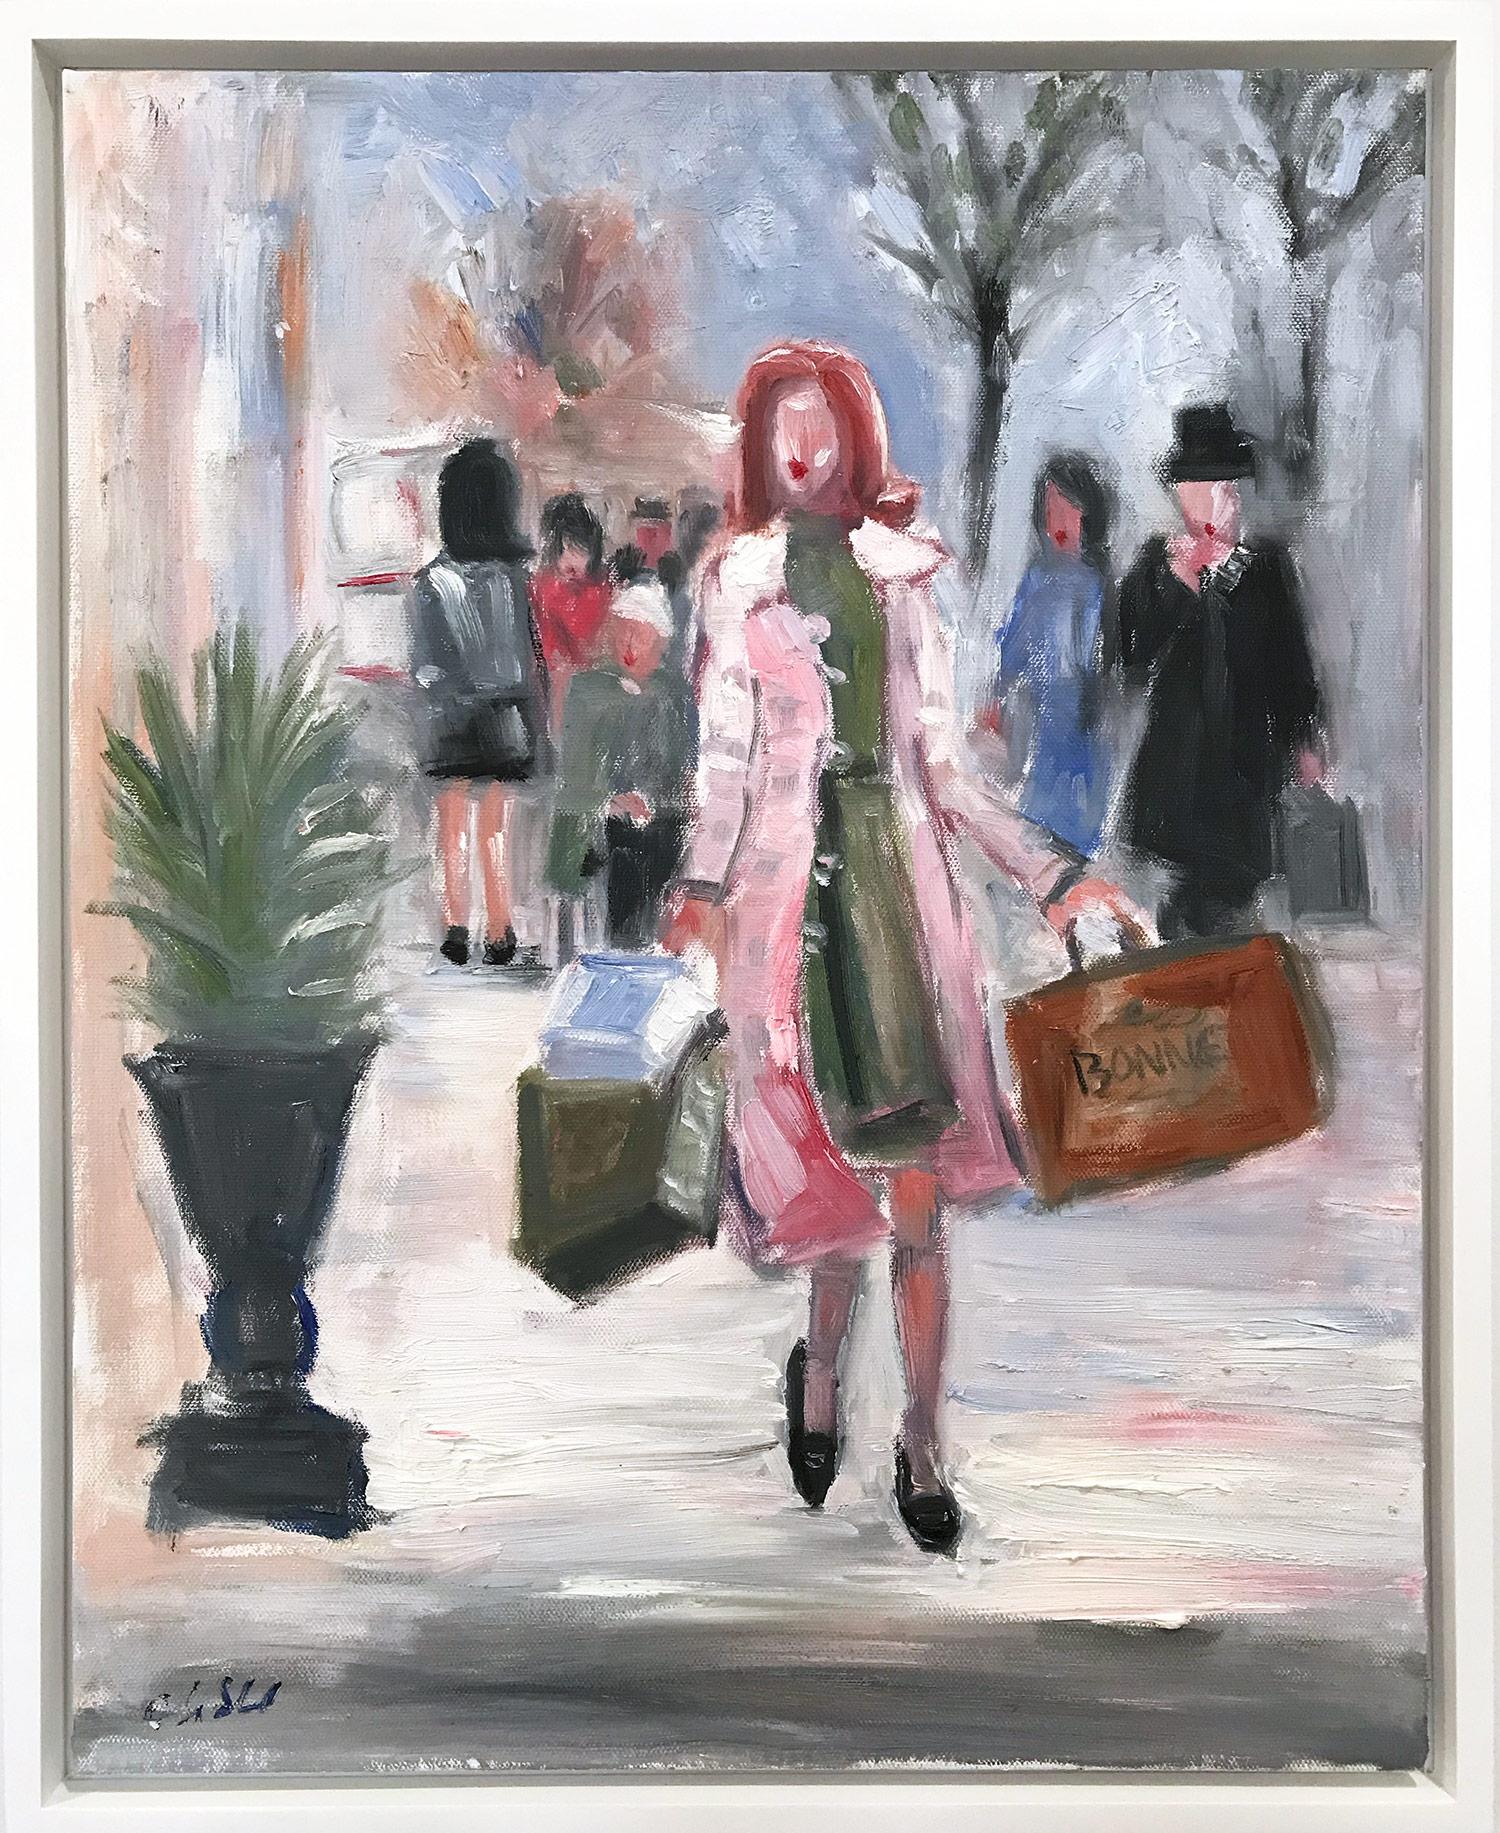 "The Queens Gambit" New York City Fashion Impressionistic Oil Painting on Canvas